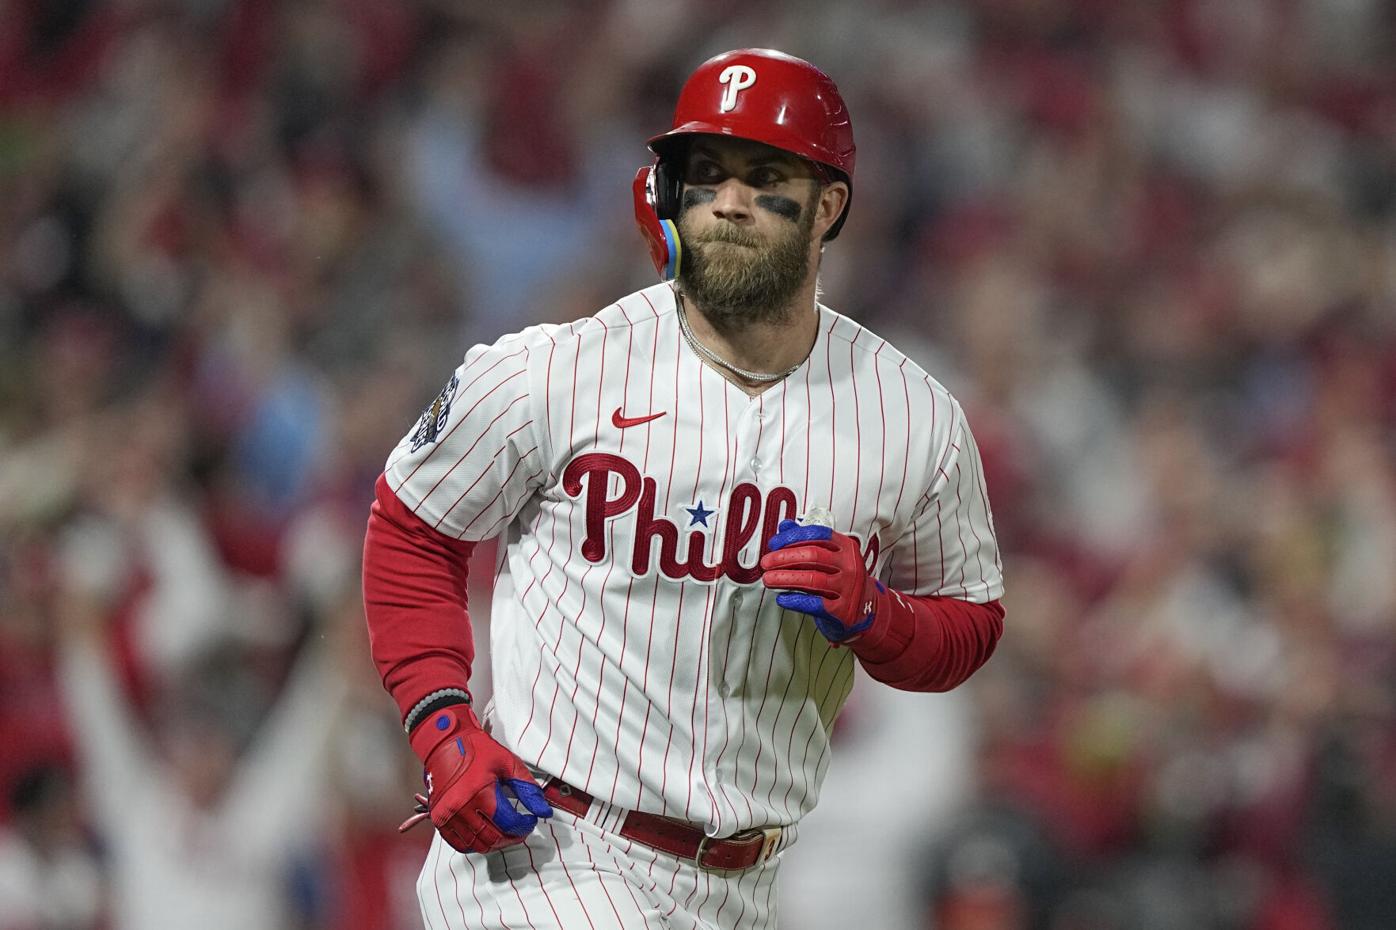 Phillies' Rob Thomson was absolutely robbed of end-of-season award